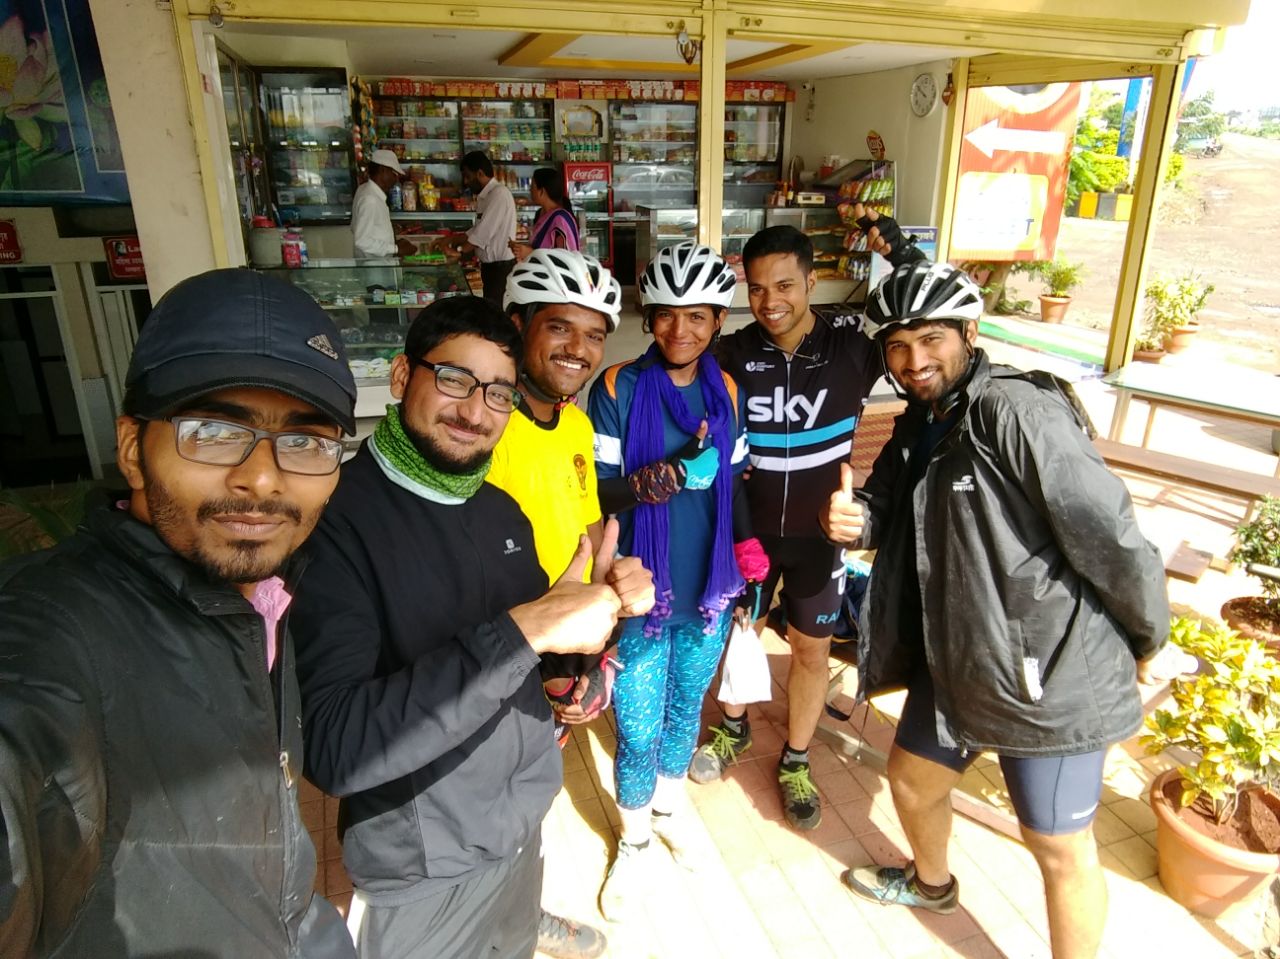 Sunday morning ride - cyclist group